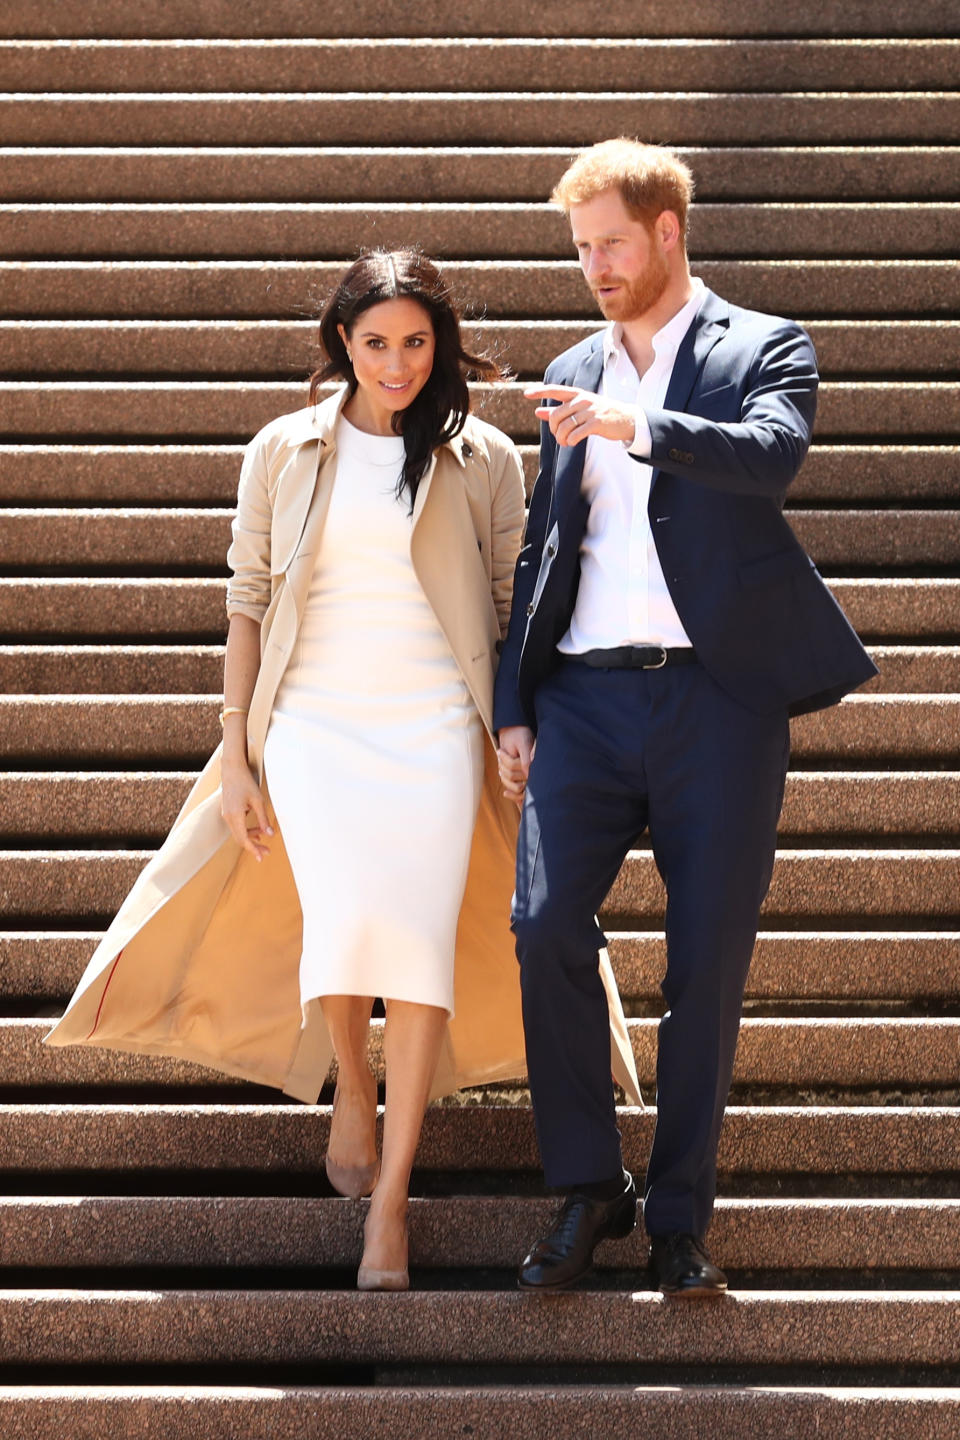 Prince Harry, Duke of Sussex and Meghan, Duchess of Sussex during the first day of their hectic royal tour of Australia, NZ, Tonga and Fiji. Source: Getty